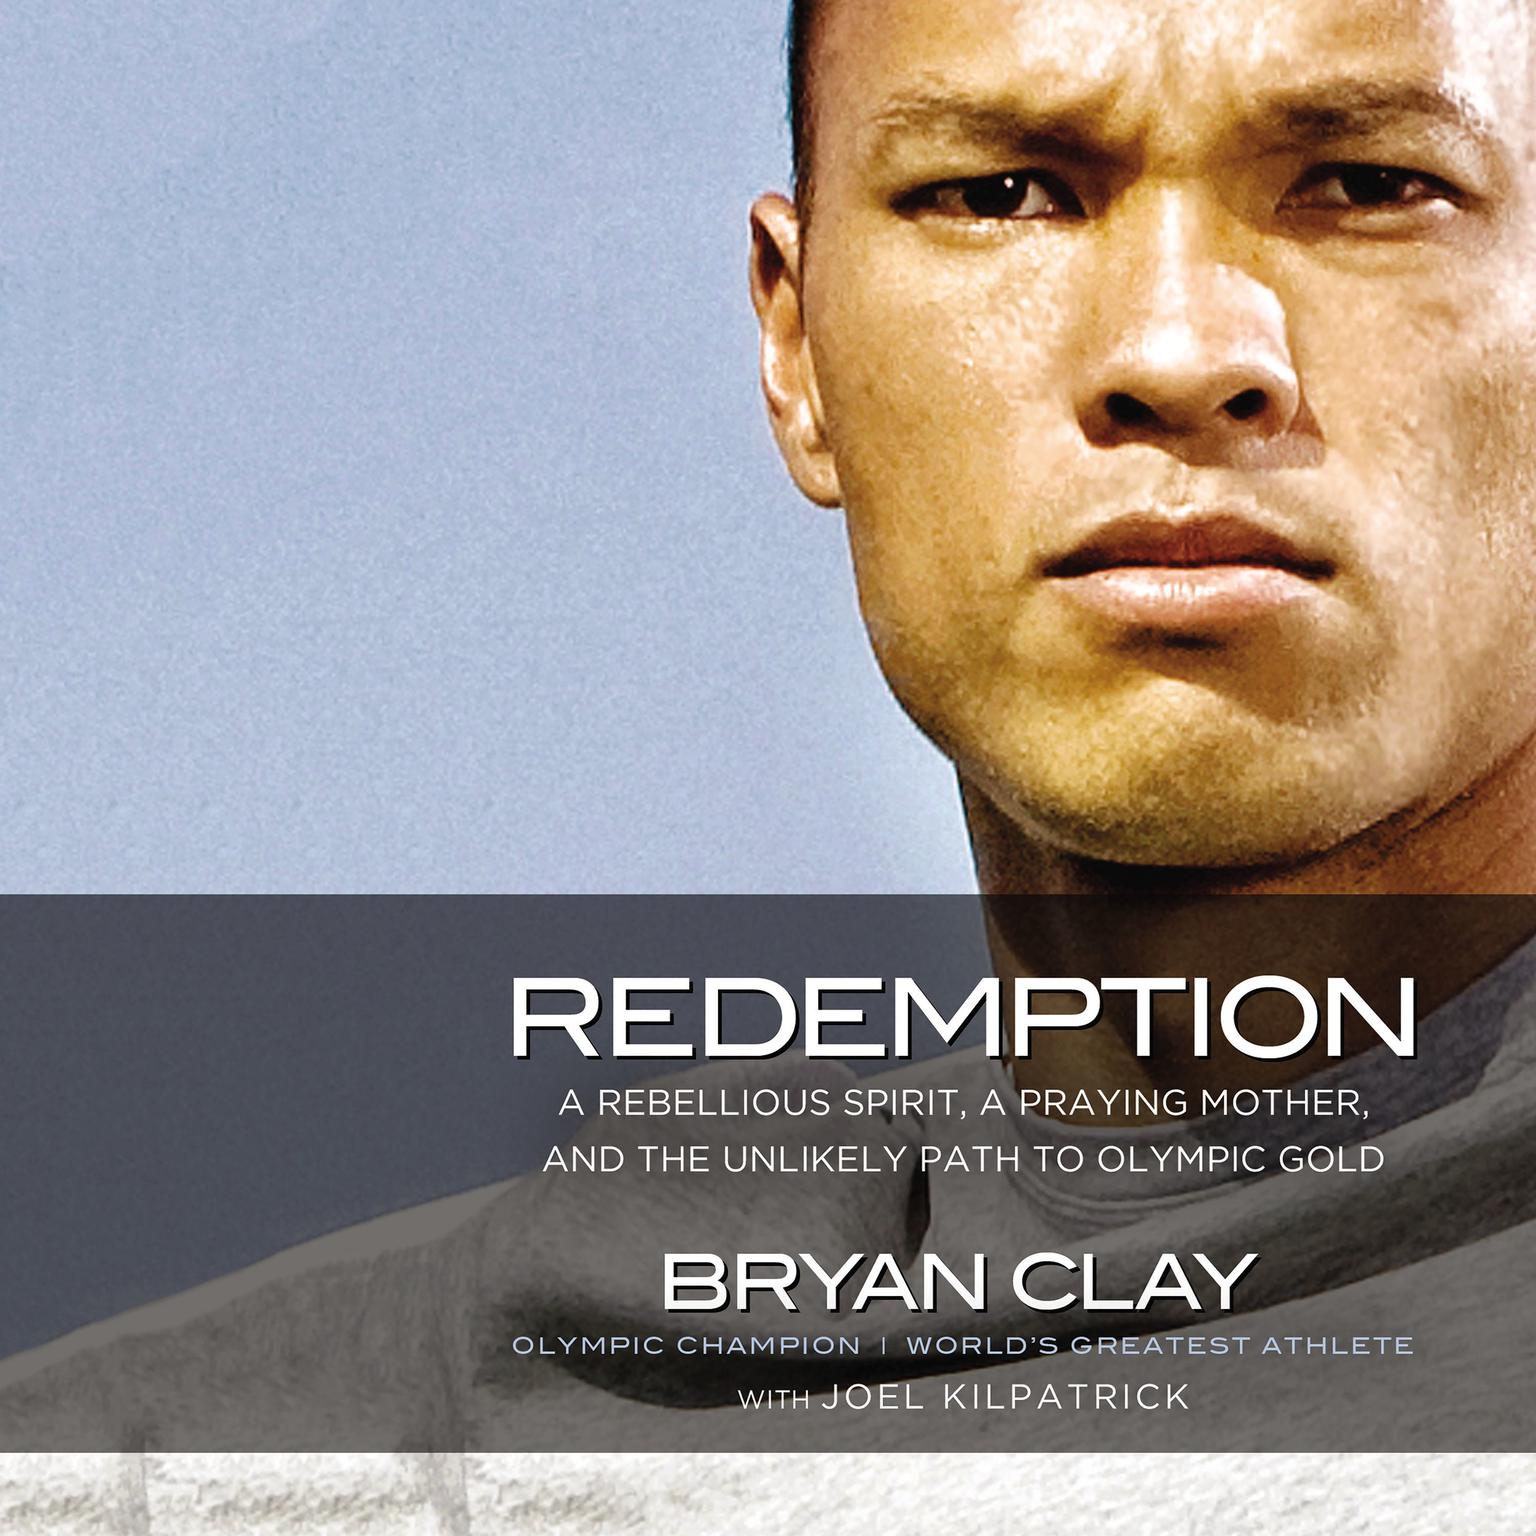 Redemption: A Rebellious Spirit, a Praying Mother, and the Unlikely Path to Olympic Gold Audiobook, by Bryan Clay